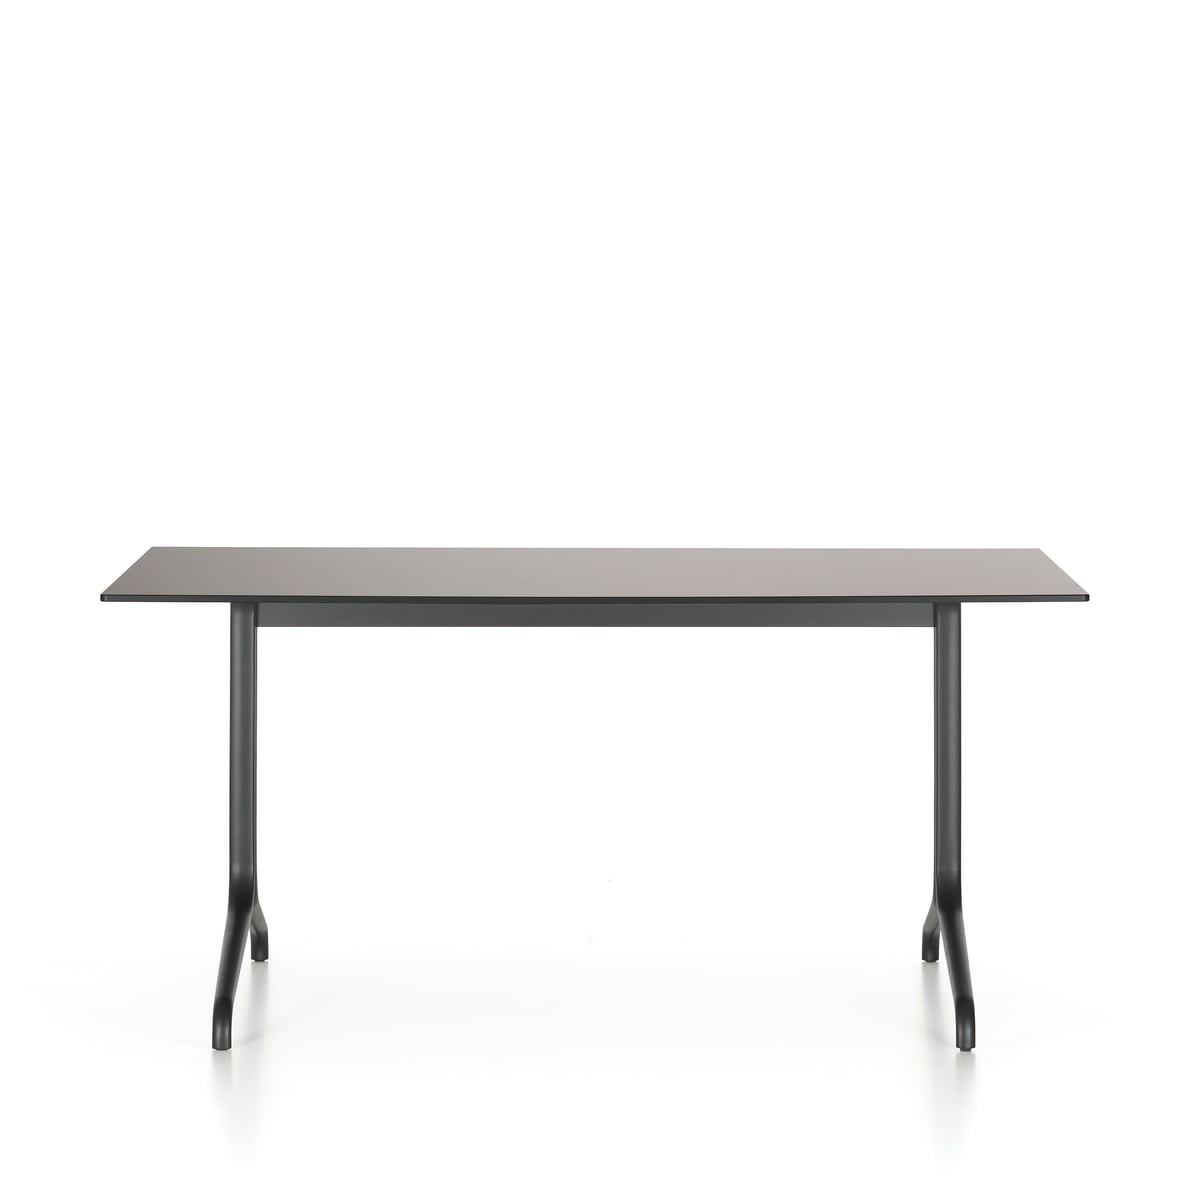 Bistro Stand-up Table Vitra - Milia Shop